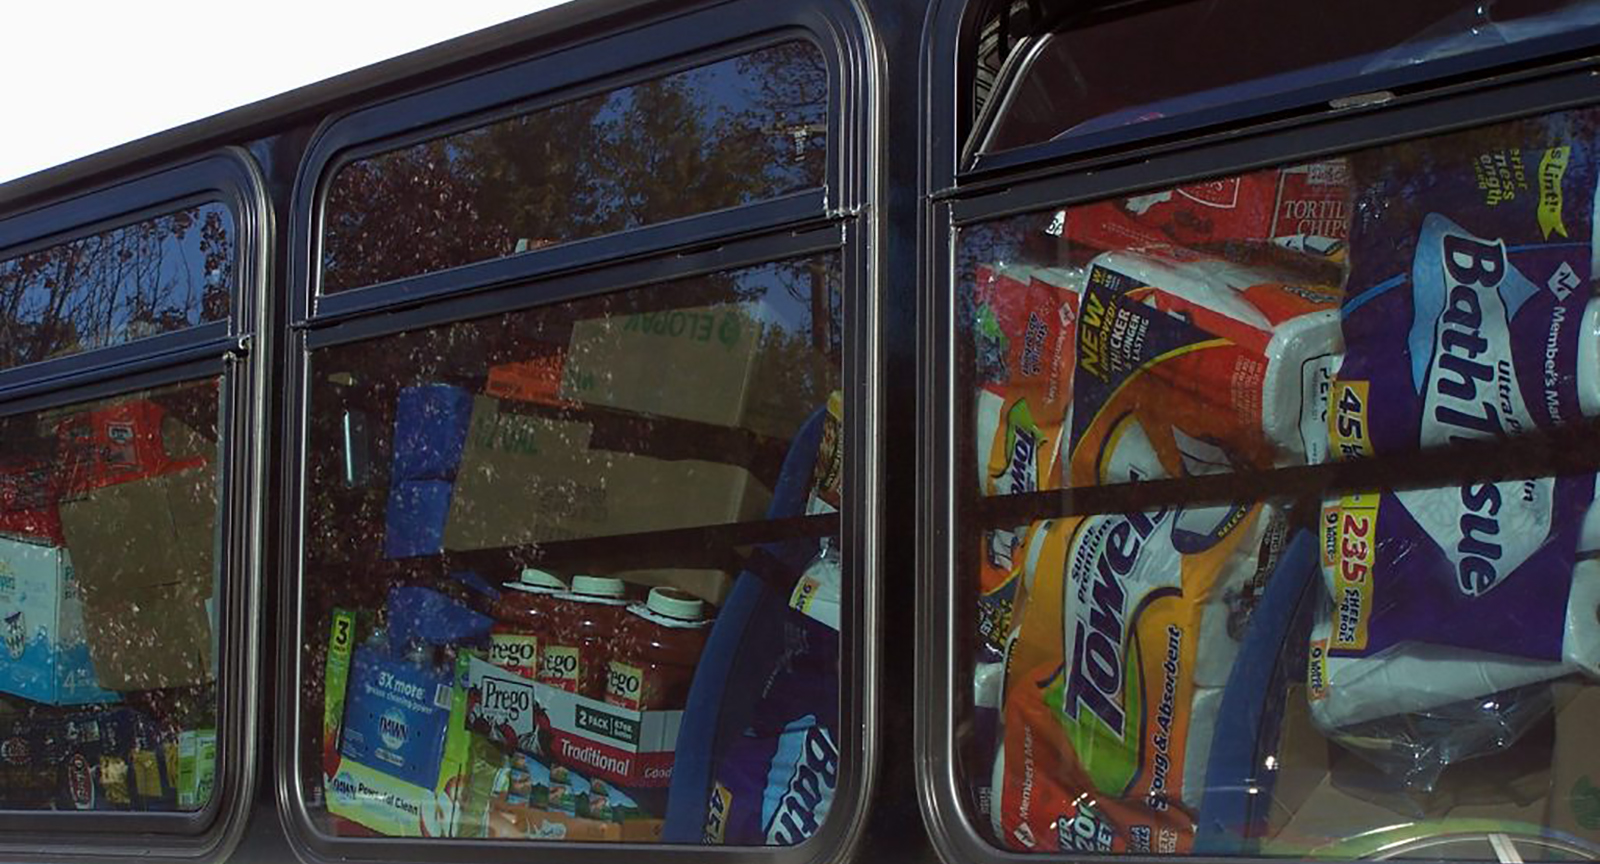 DART bus stuffed with donations 17